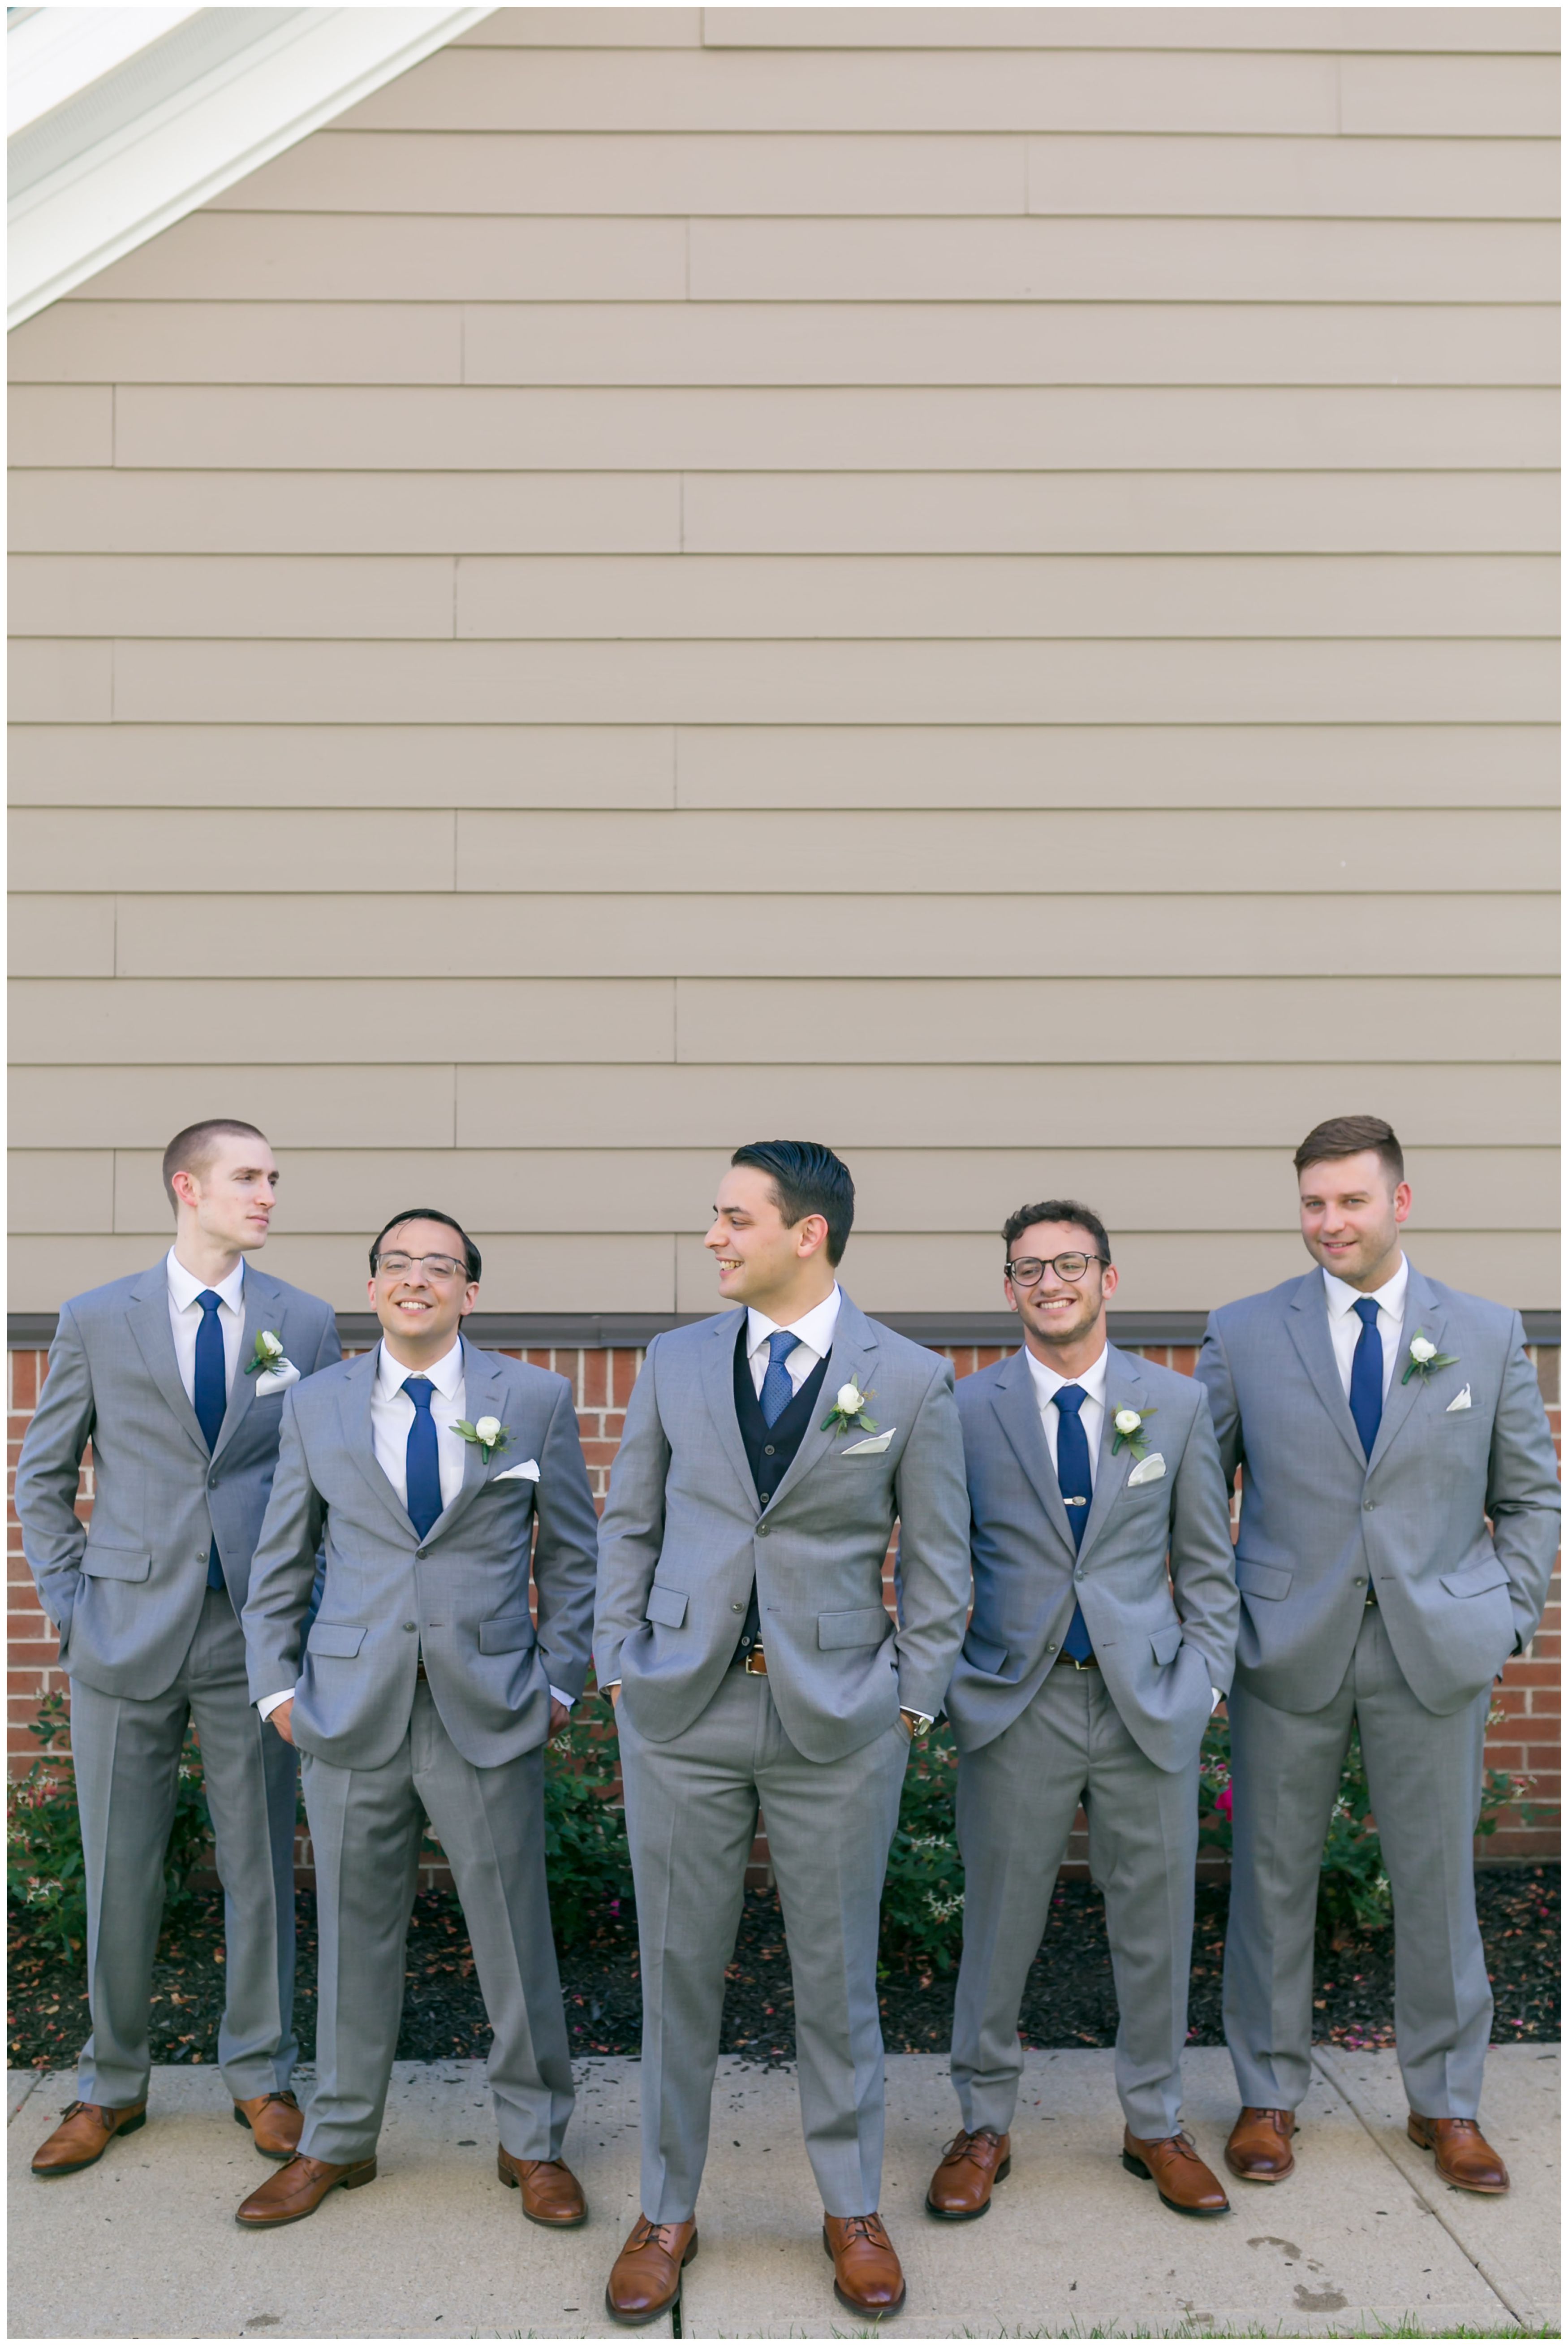 Groom and groomsmen in light grey suits and navy vests and ties